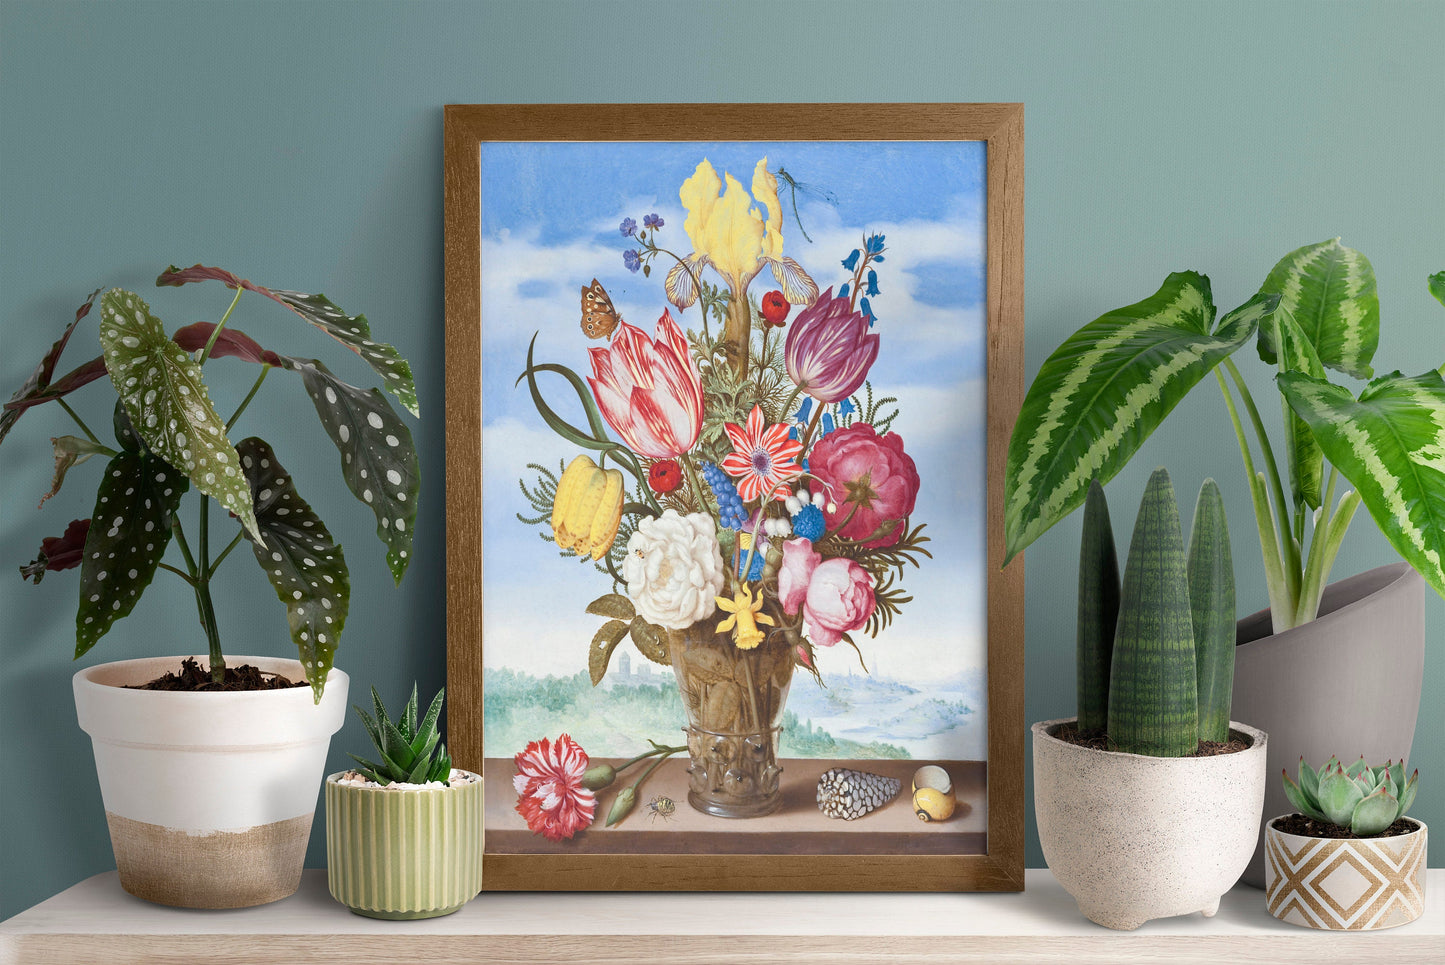 Bouquet of Flowers Poster Print Wall Hanging Decor